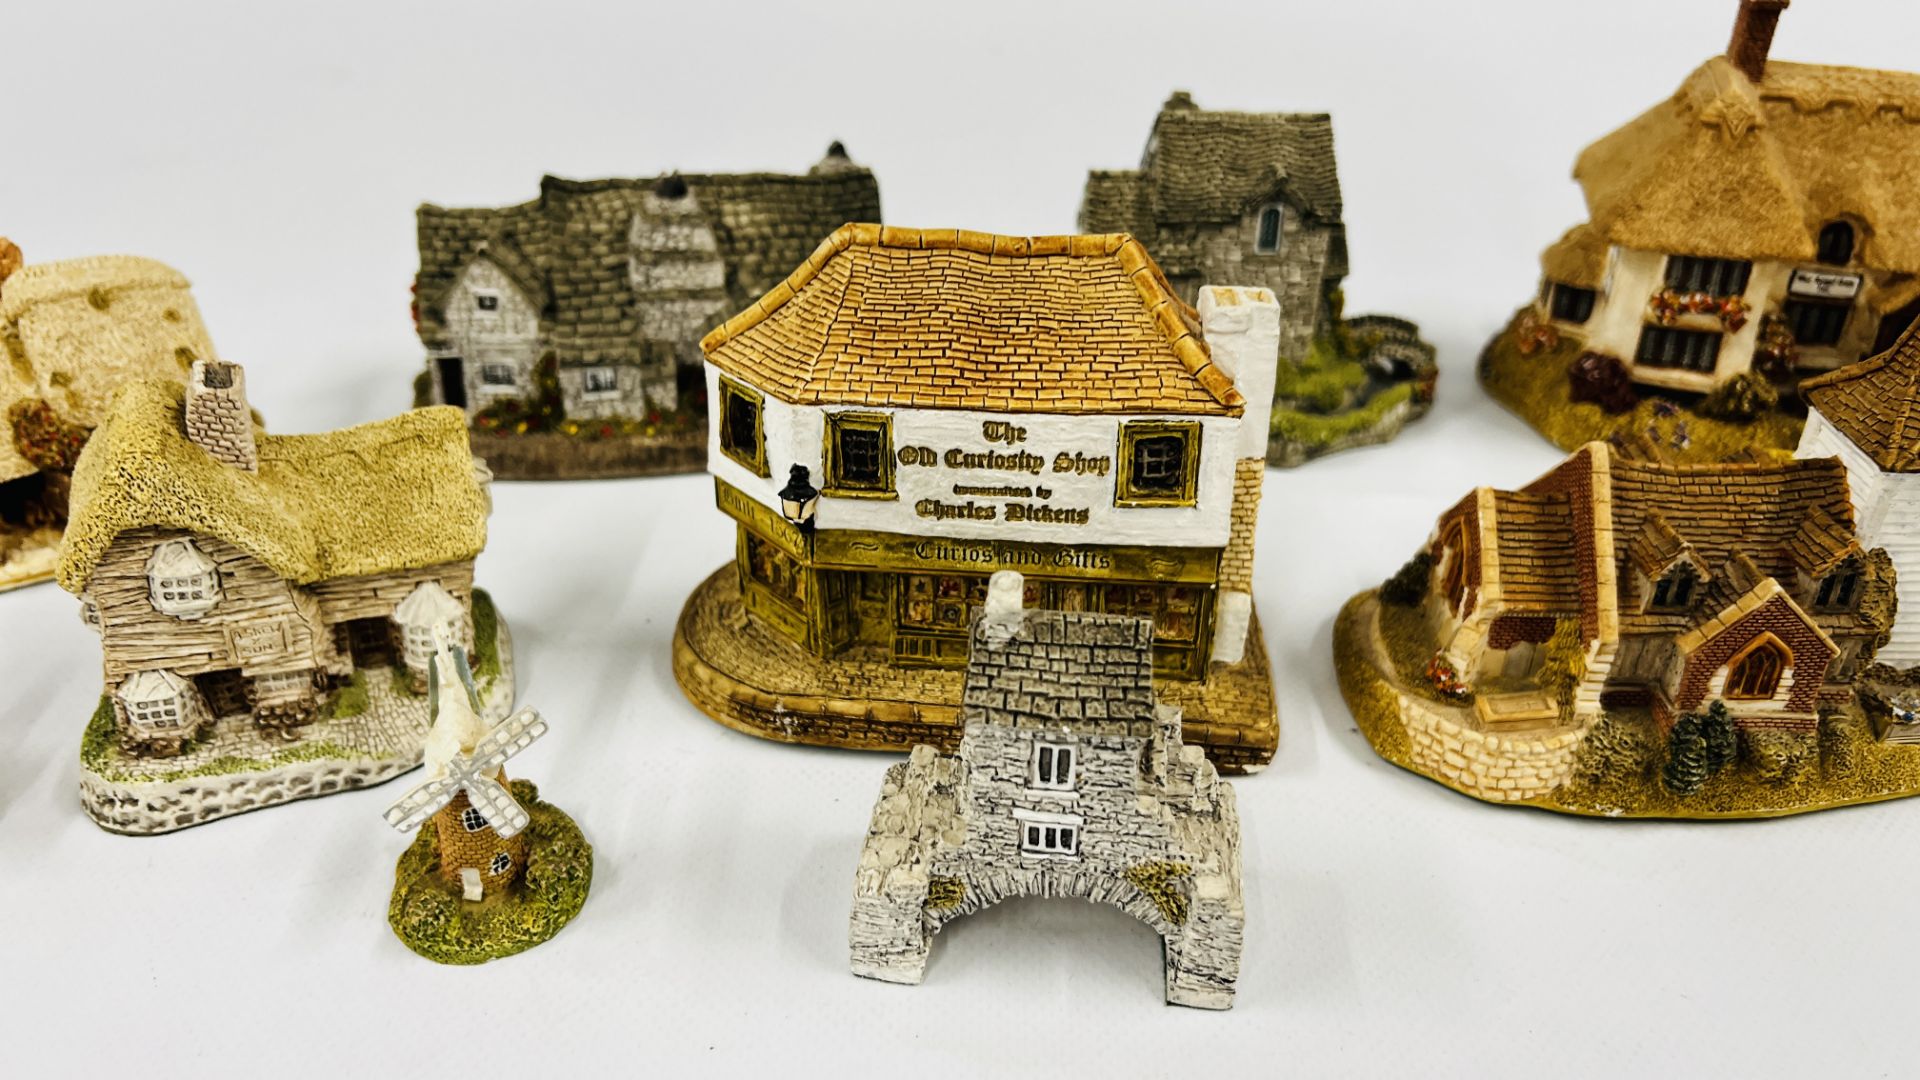 A COLLECTION OF 13 LILLIPUT LANE COTTAGES, SOME HAVING DEEDS ALONG WITH LILLLIPUT LANE BOOKLETS. - Image 11 of 13